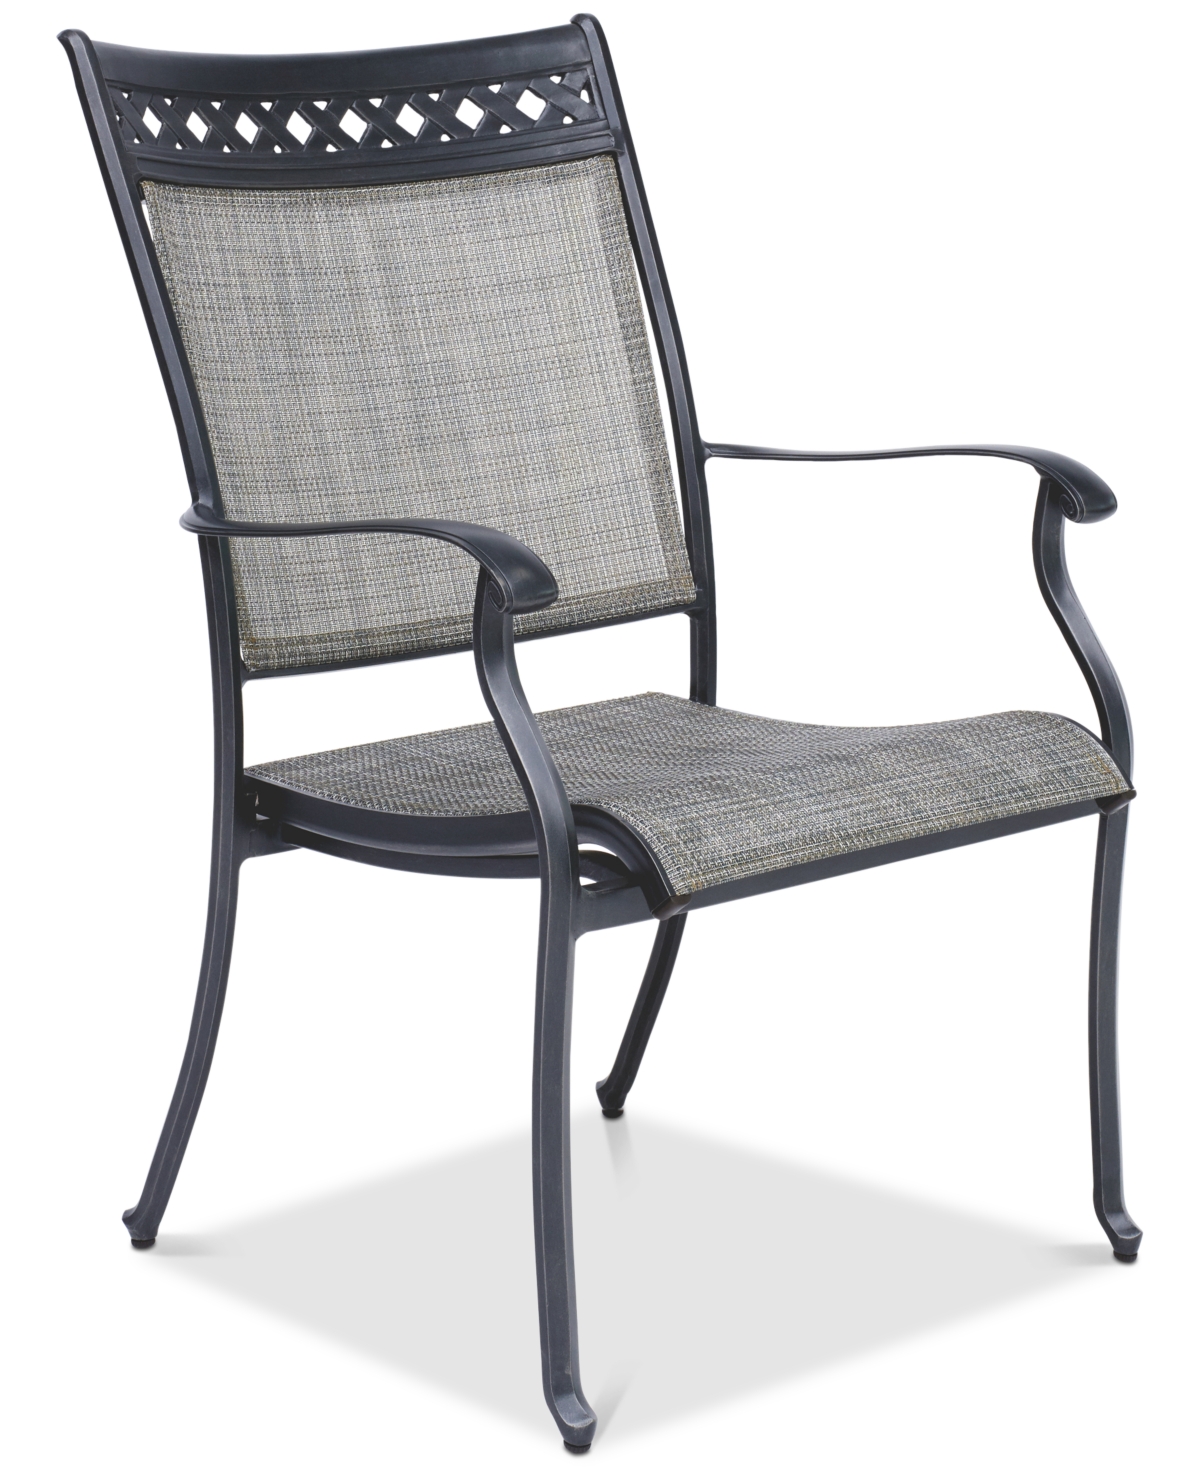 Agio Set Of 4 Vintage Ii Outdoor Sling Dining Chairs, Created For Macy's